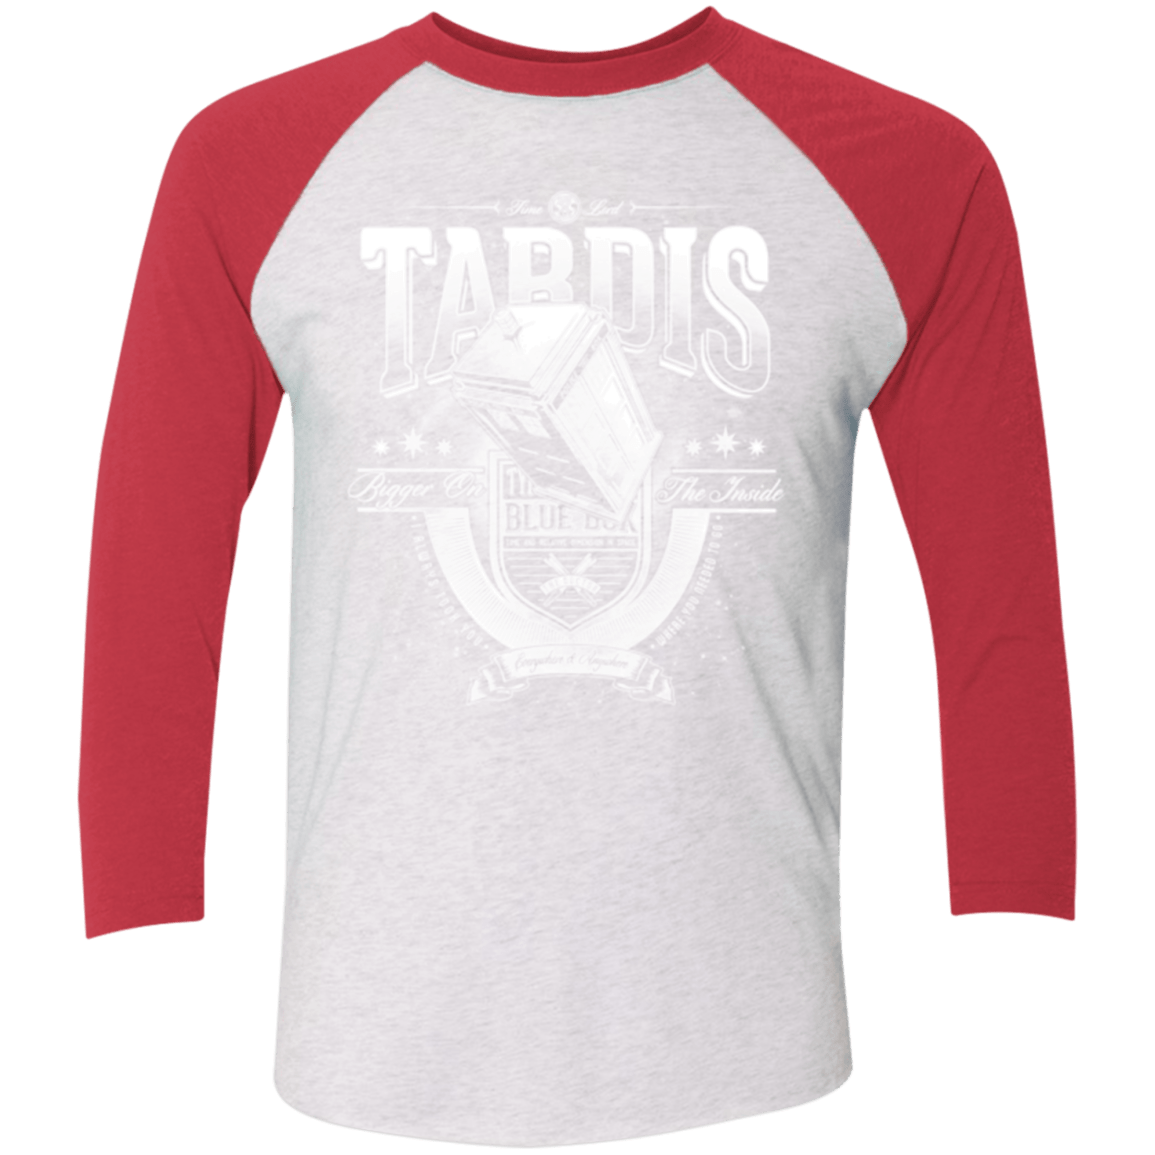 T-Shirts Heather White/Vintage Red / X-Small Tardis Men's Triblend 3/4 Sleeve